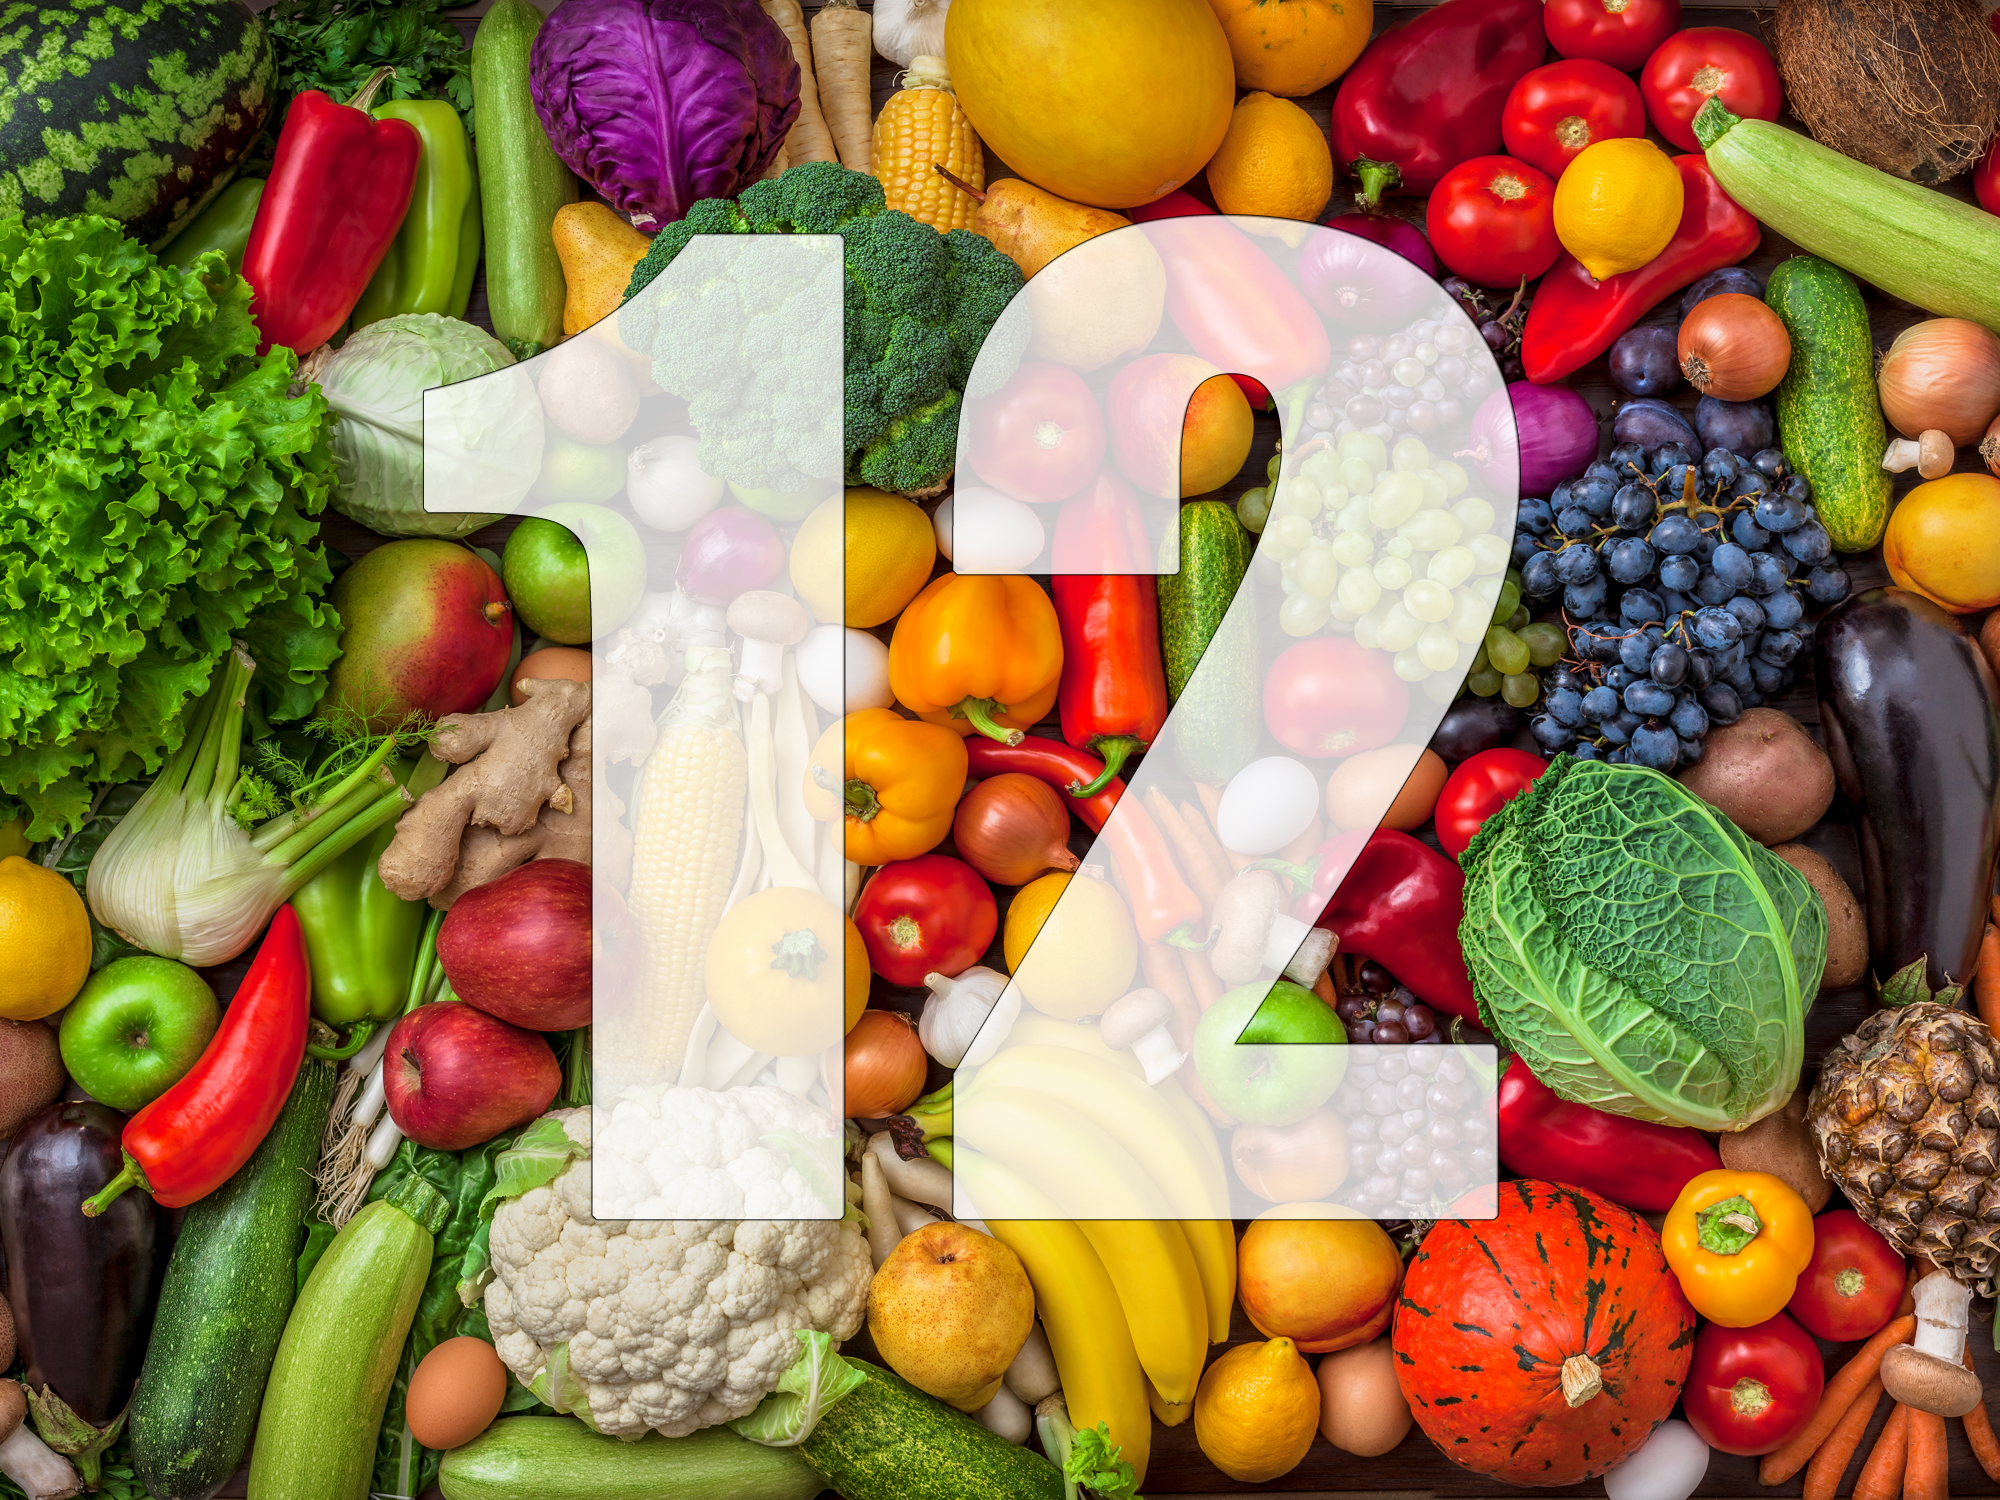 12 fruits and veggies you need to buy organic (and 15 you don’t)